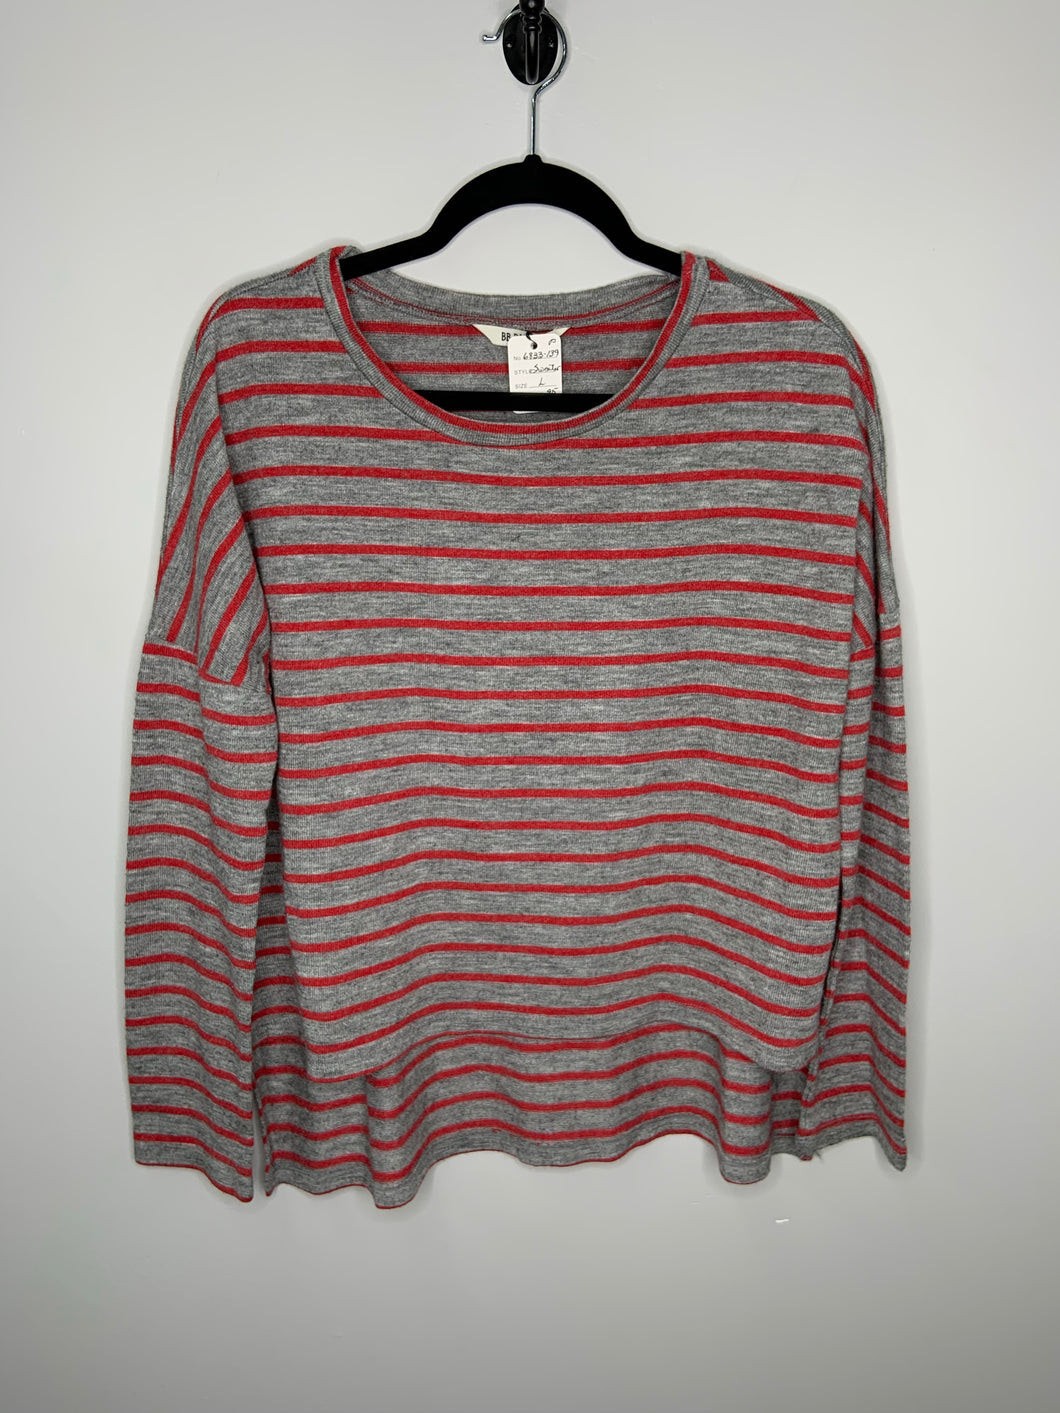 Grey & Red Striped Sweater